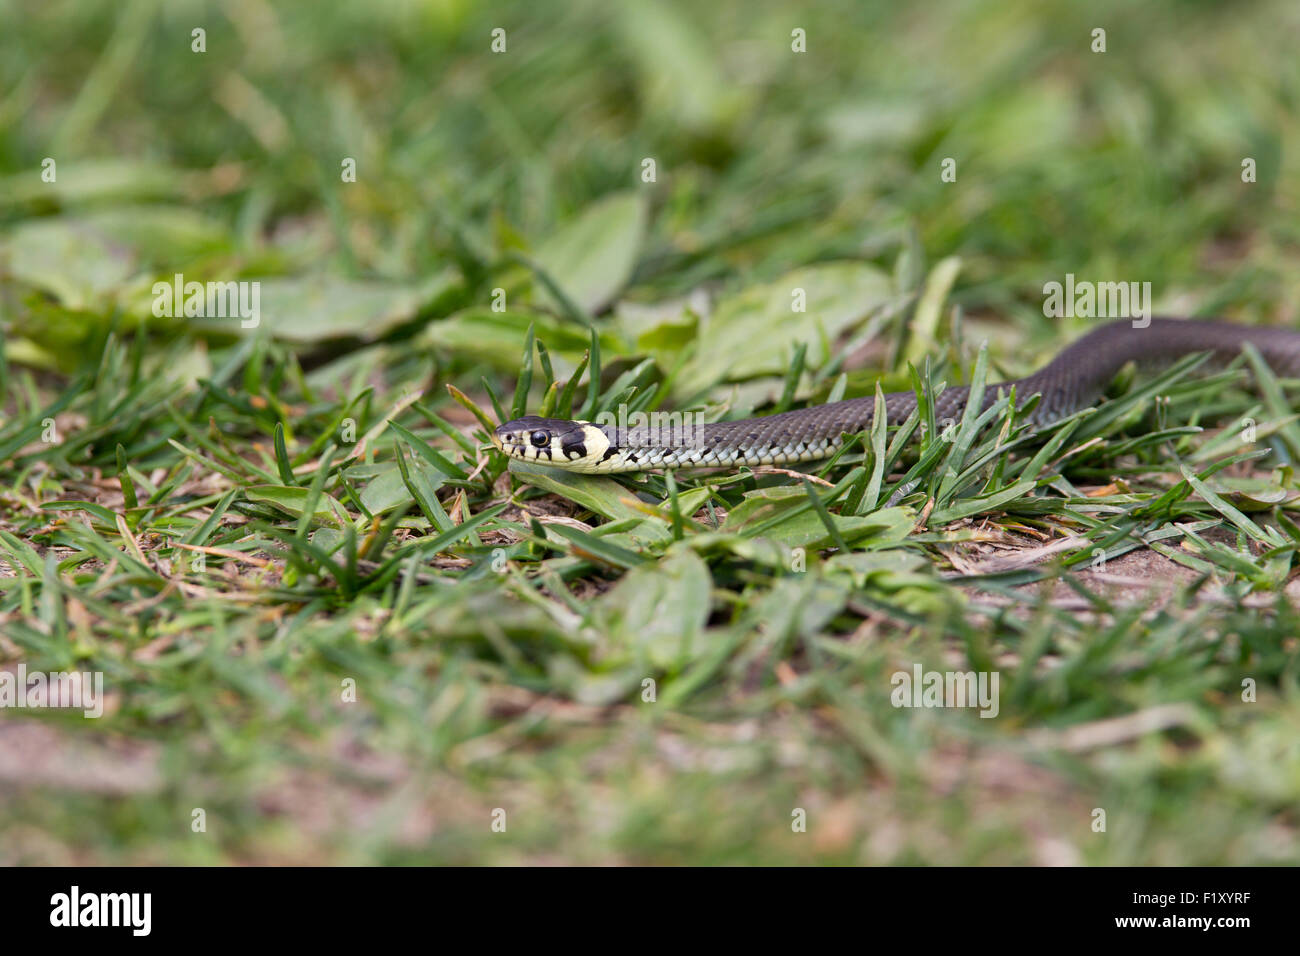 A Swedish snake crawls in the grass Stock Photo